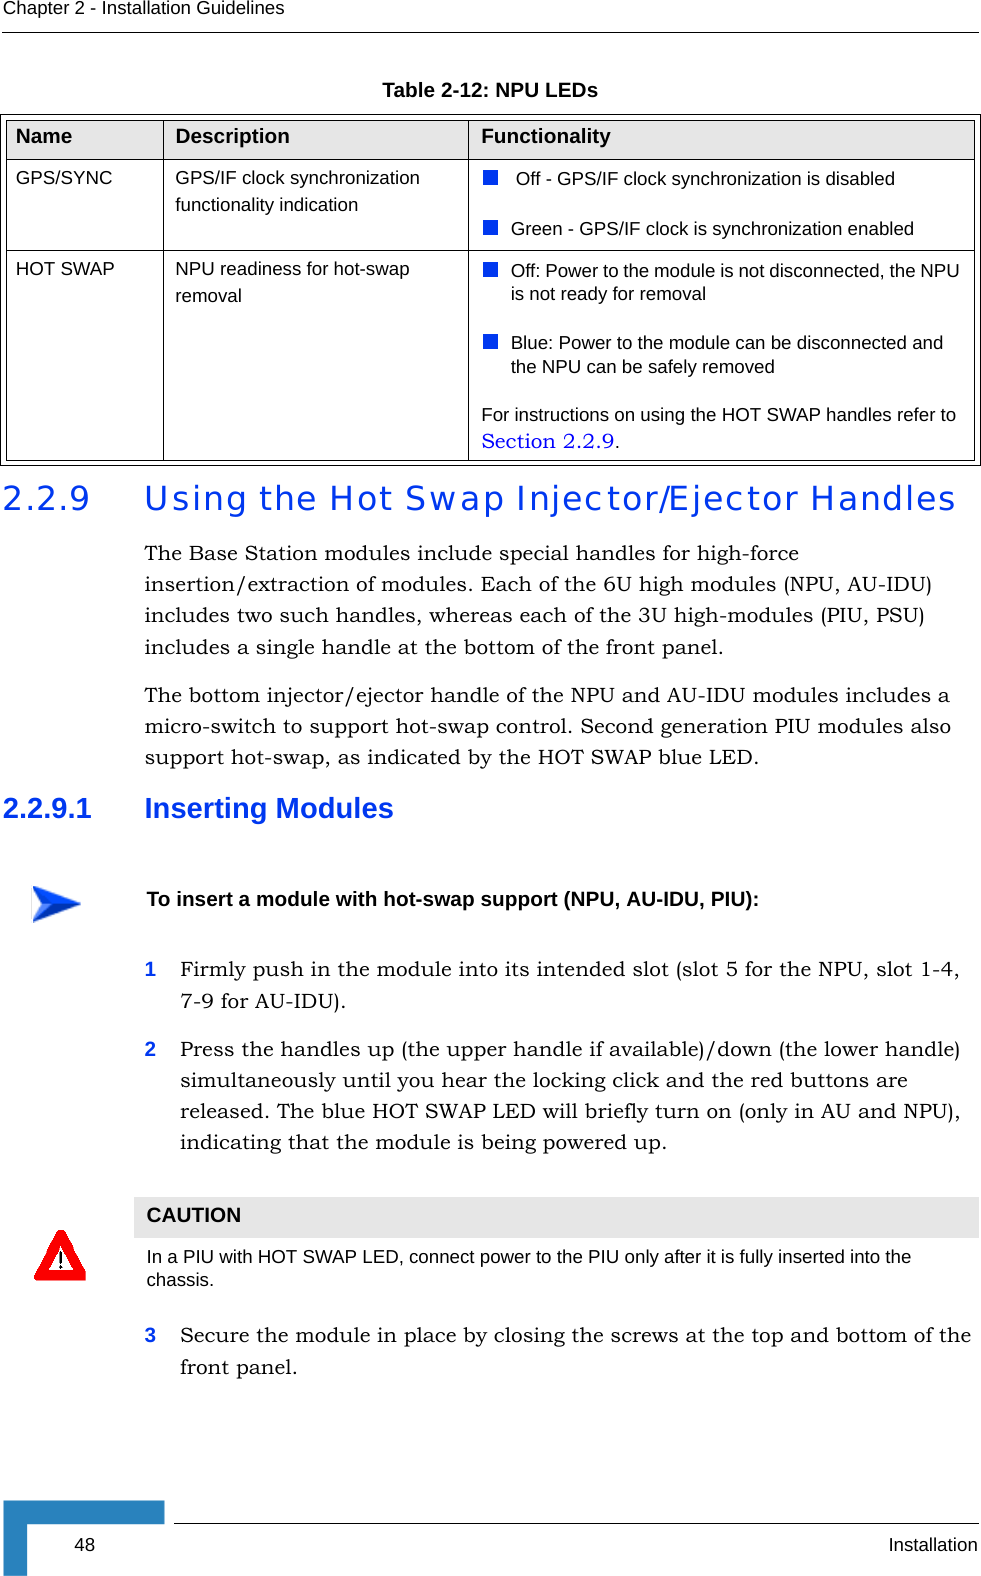 48 InstallationChapter 2 - Installation Guidelines2.2.9 Using the Hot Swap Injector/Ejector HandlesThe Base Station modules include special handles for high-force insertion/extraction of modules. Each of the 6U high modules (NPU, AU-IDU) includes two such handles, whereas each of the 3U high-modules (PIU, PSU) includes a single handle at the bottom of the front panel. The bottom injector/ejector handle of the NPU and AU-IDU modules includes a micro-switch to support hot-swap control. Second generation PIU modules also support hot-swap, as indicated by the HOT SWAP blue LED.2.2.9.1 Inserting Modules1Firmly push in the module into its intended slot (slot 5 for the NPU, slot 1-4, 7-9 for AU-IDU).2Press the handles up (the upper handle if available)/down (the lower handle) simultaneously until you hear the locking click and the red buttons are released. The blue HOT SWAP LED will briefly turn on (only in AU and NPU), indicating that the module is being powered up.3Secure the module in place by closing the screws at the top and bottom of the front panel.GPS/SYNC GPS/IF clock synchronization functionality indication Off - GPS/IF clock synchronization is disabledGreen - GPS/IF clock is synchronization enabledHOT SWAP NPU readiness for hot-swap removalOff: Power to the module is not disconnected, the NPU is not ready for removalBlue: Power to the module can be disconnected and the NPU can be safely removedFor instructions on using the HOT SWAP handles refer to Section 2.2.9.To insert a module with hot-swap support (NPU, AU-IDU, PIU):CAUTIONIn a PIU with HOT SWAP LED, connect power to the PIU only after it is fully inserted into the chassis.Table 2-12: NPU LEDsName  Description Functionality